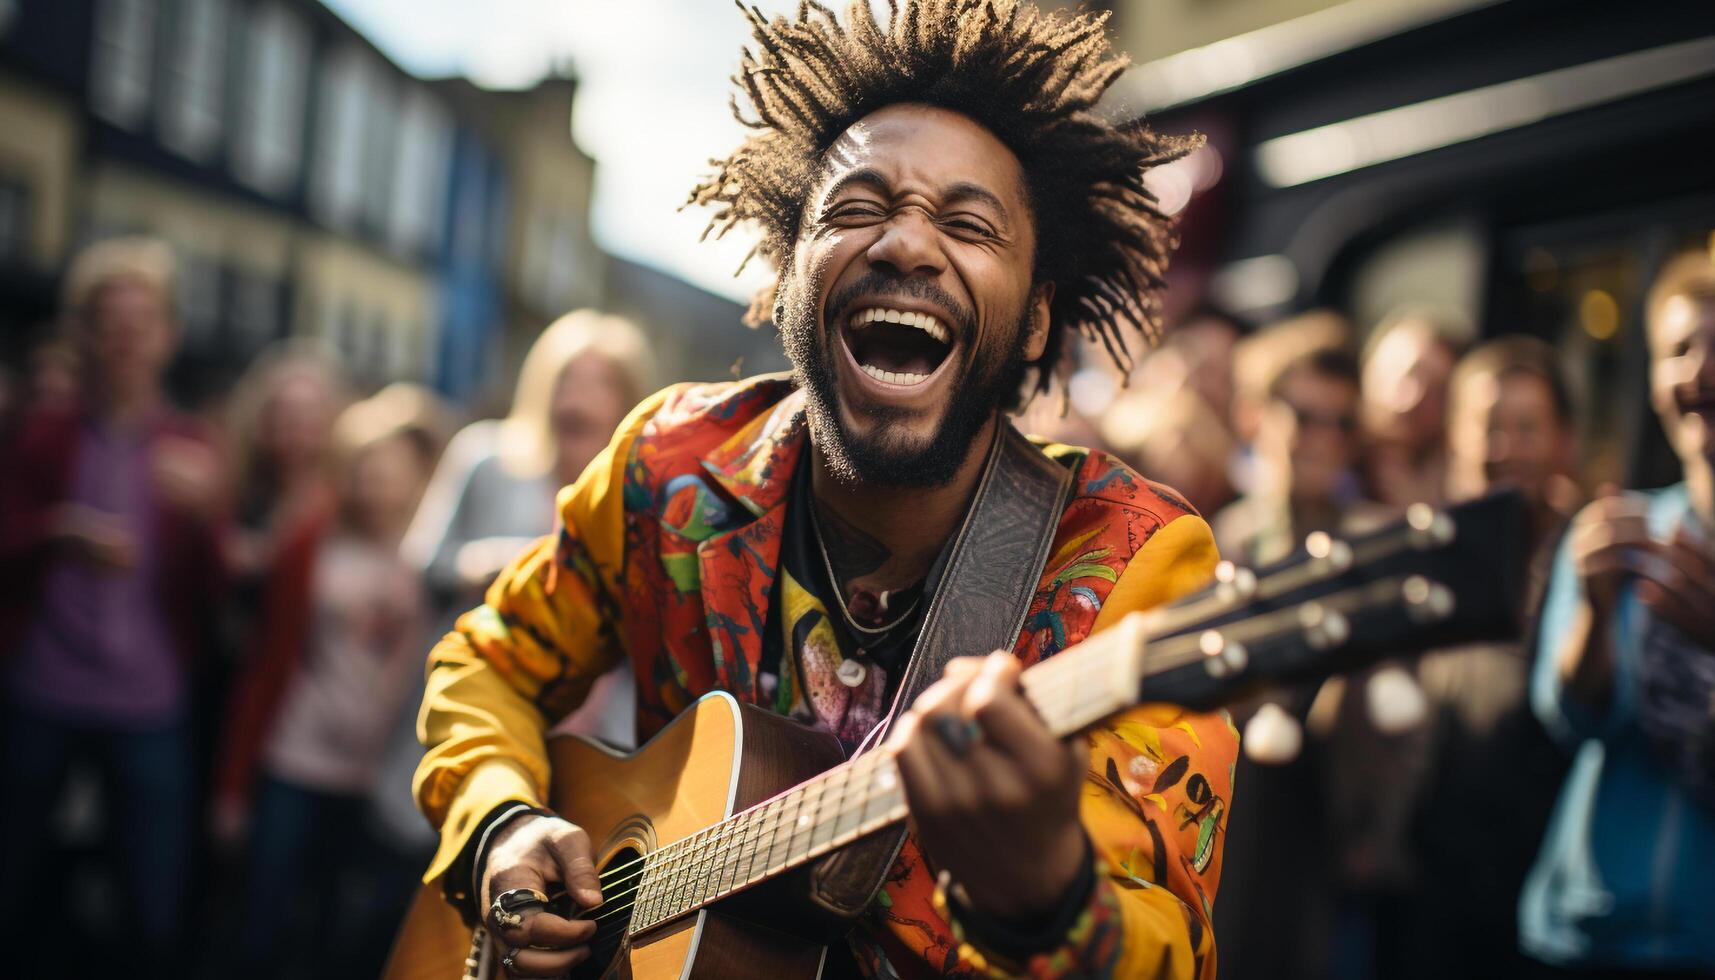 AI generated A cheerful musician playing guitar brings happiness to the crowd generated by AI photo